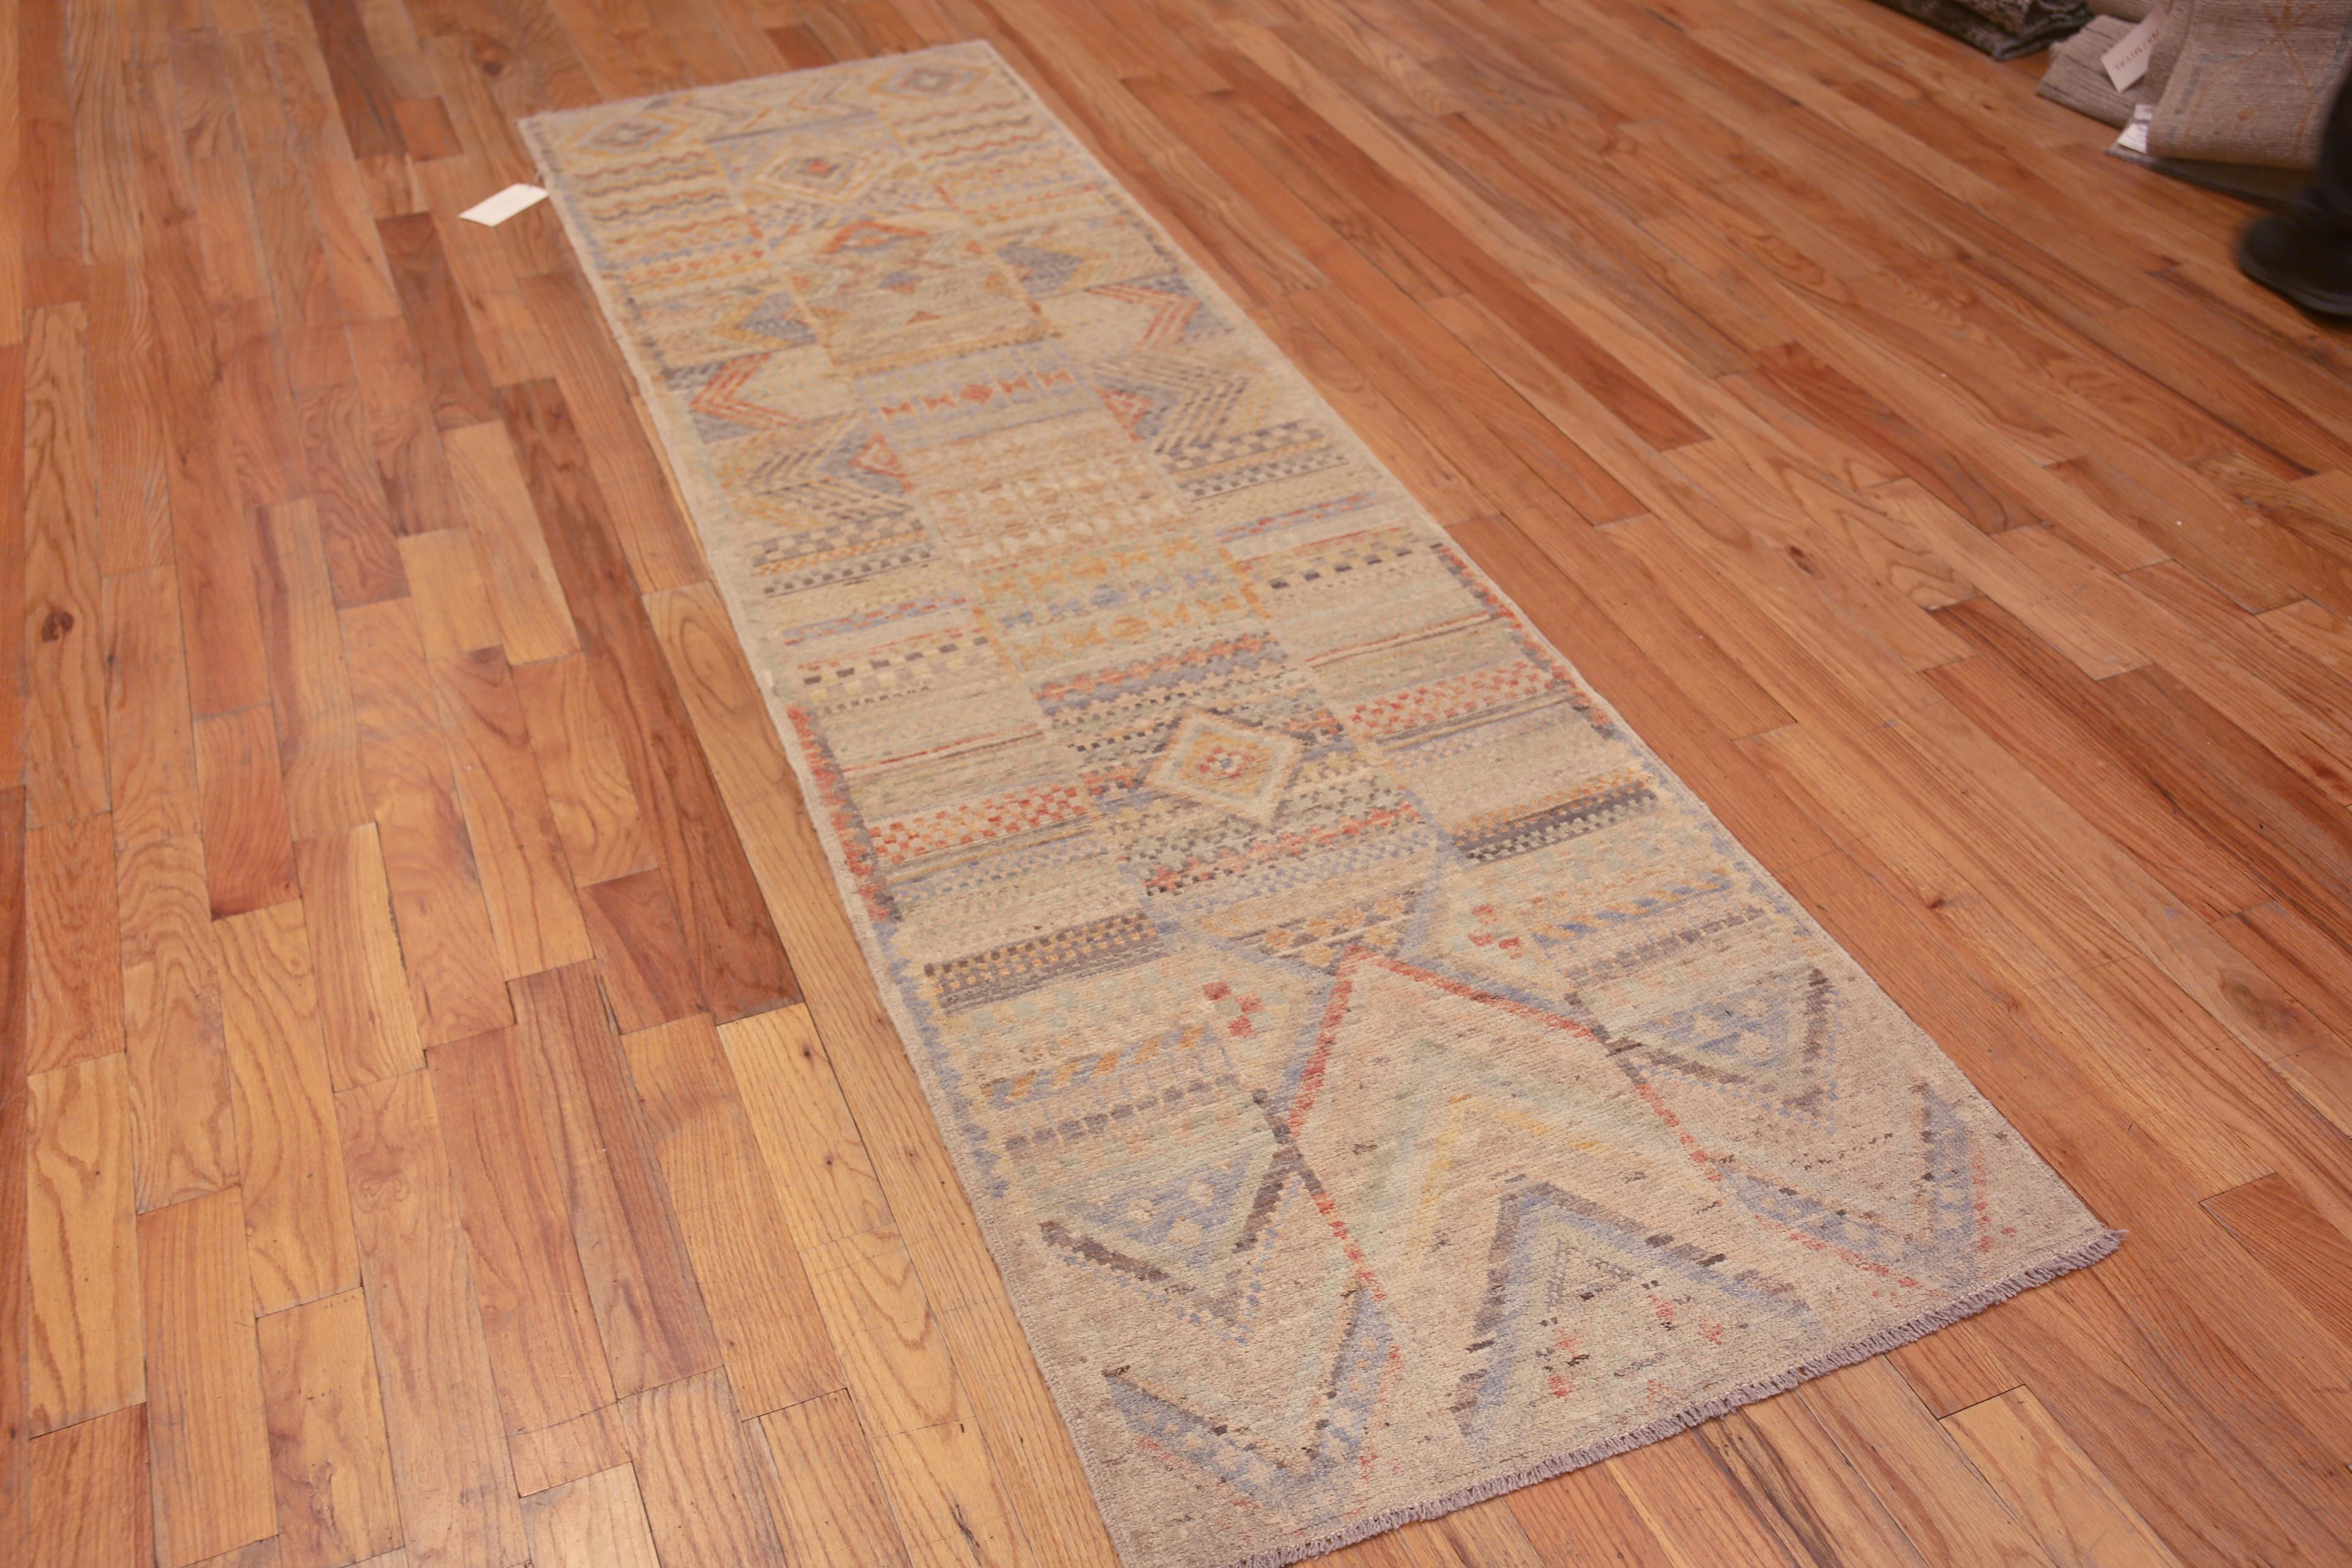 A Captivating And Quite Artistic Contemporary Rustic Tribal Geometric Design Modern Hallway Runner Rug, Country of Origin: Central Asia, Circa Date: Modern Rug 